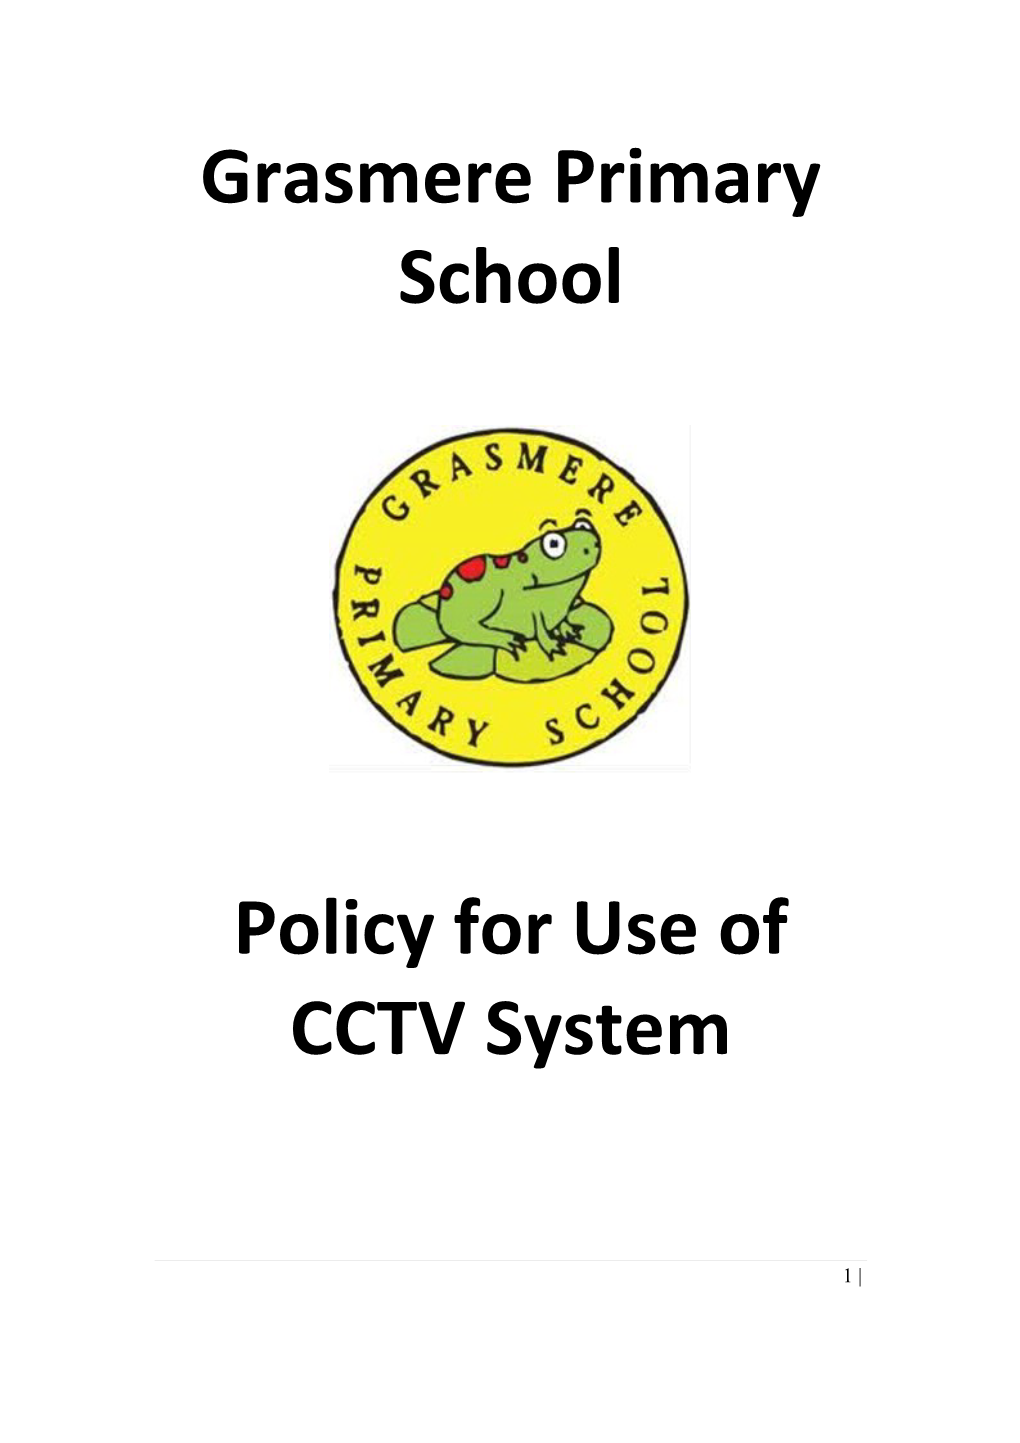 Policy for Use of CCTV System